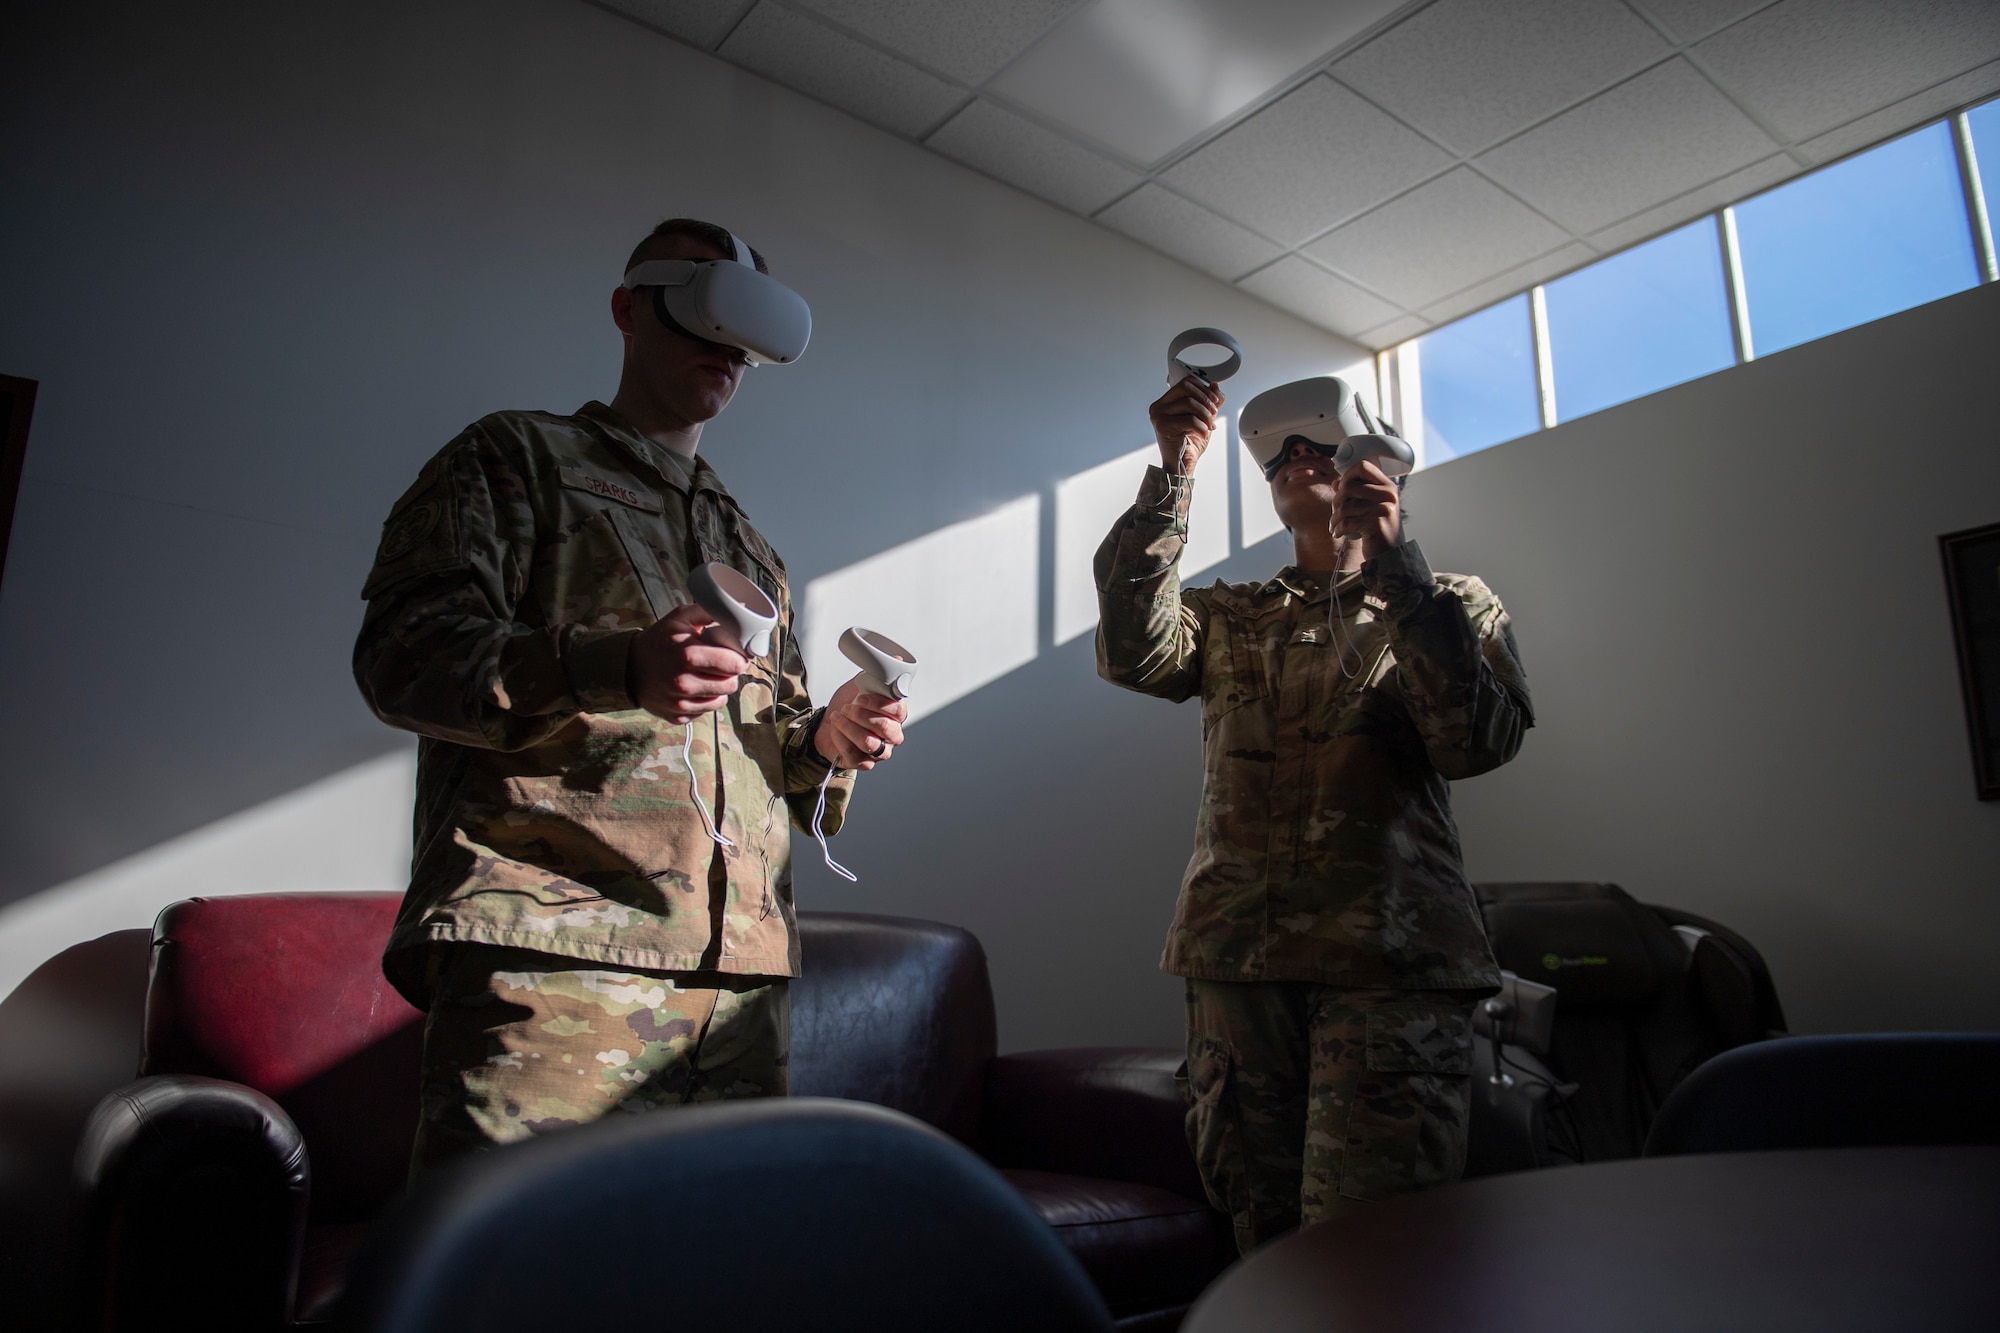 A photo of two Airmen standing in the middle of a room with VR headsets on.